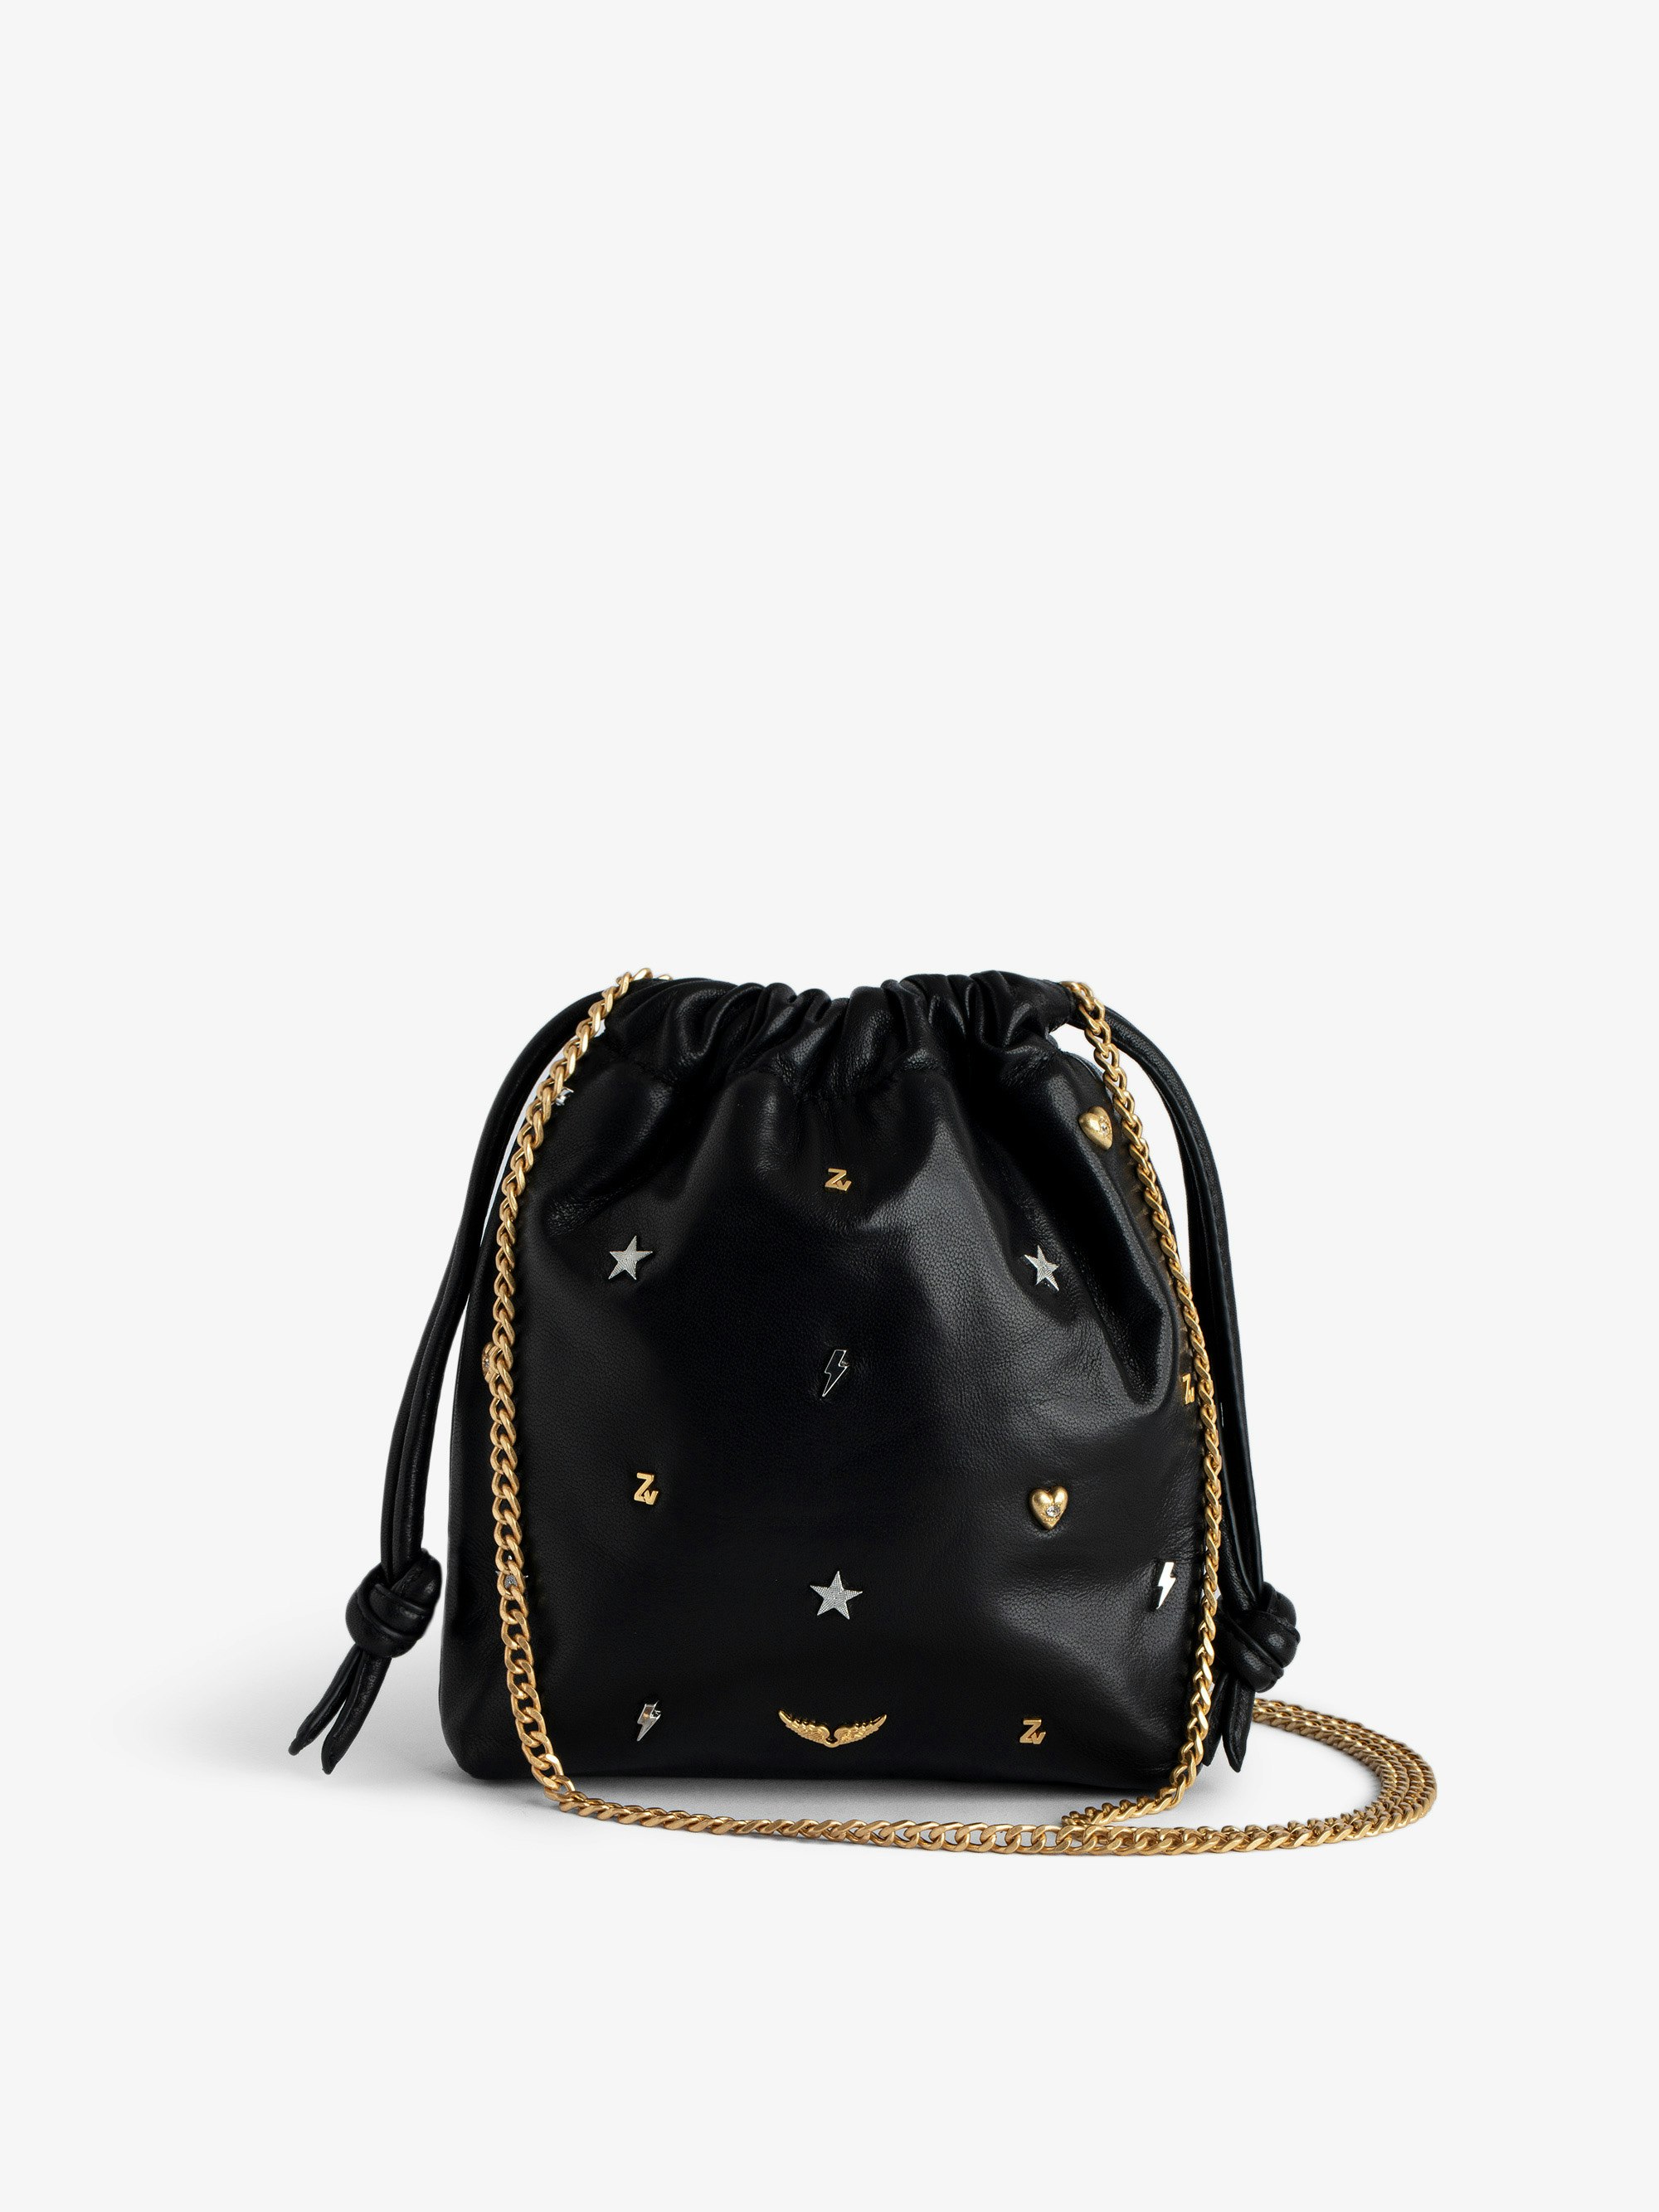 Rock to Go Lucky Charms Bag - Women's small bucket bag in black leather with silver and gold tone charms.